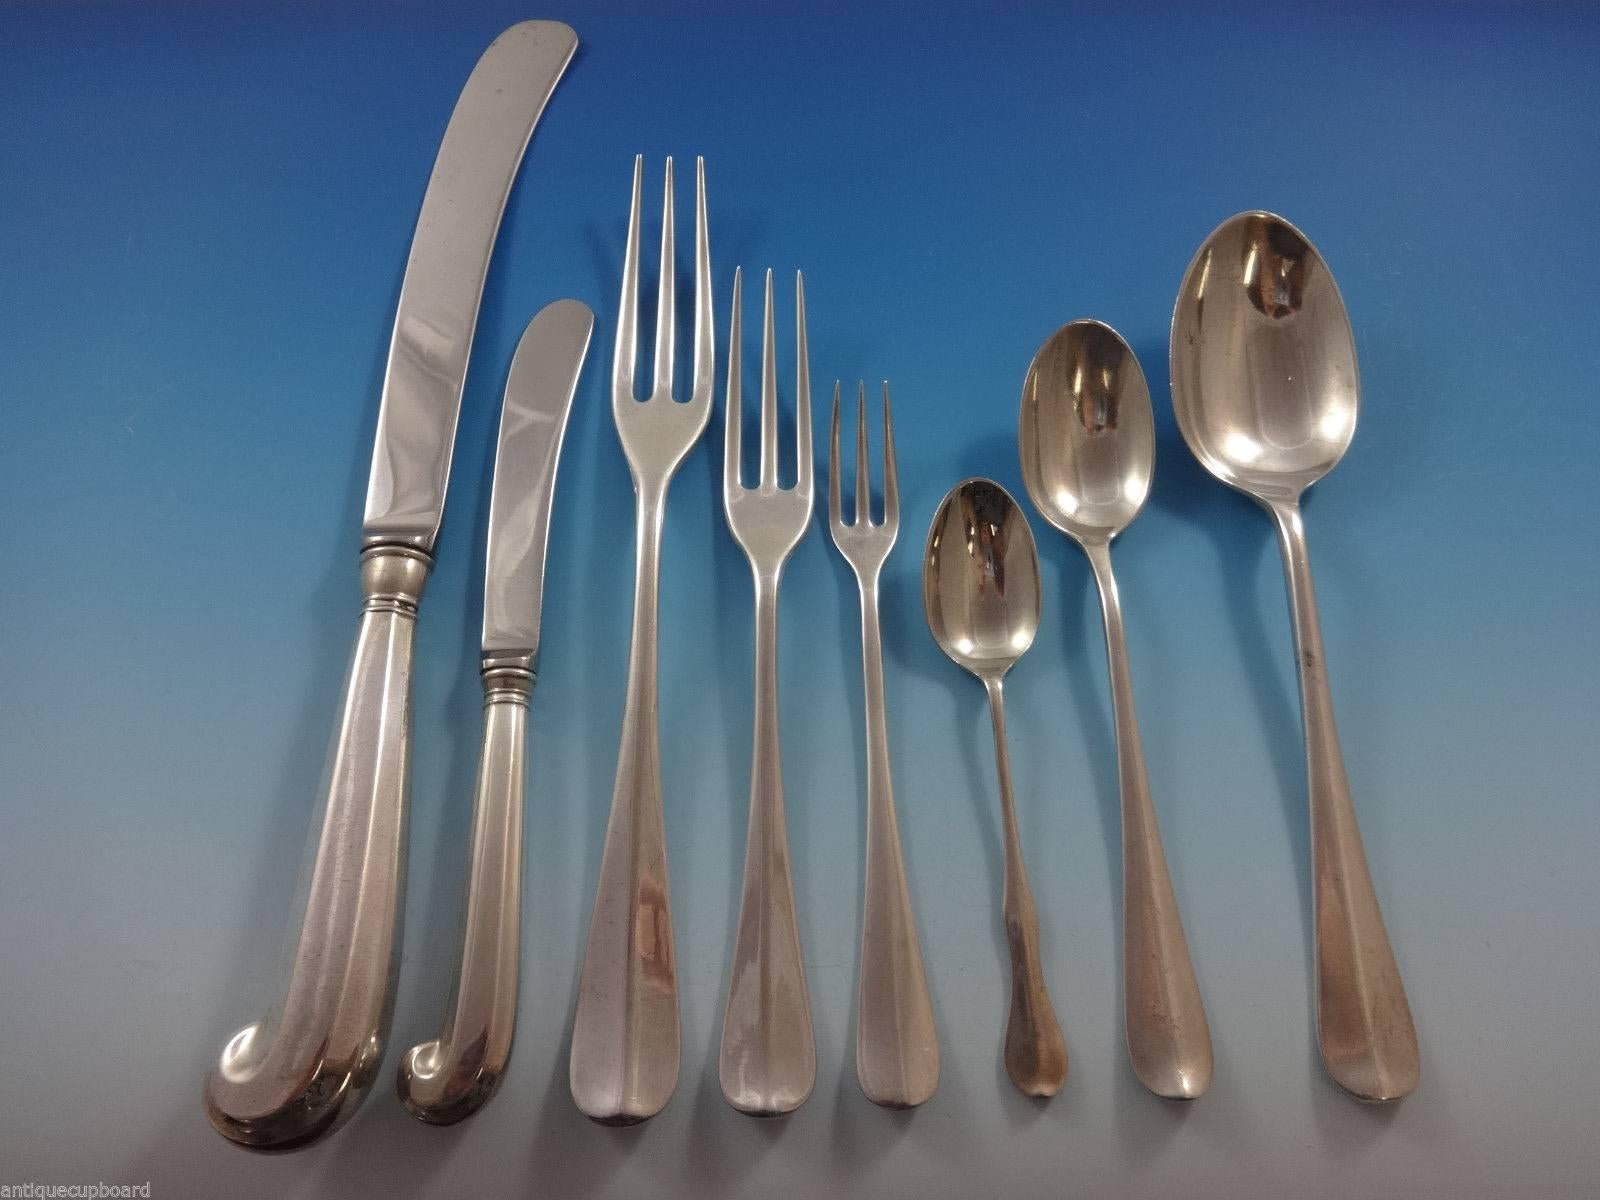 The Stieff Company was known for the quality and value of its silver products. Colonial Williamsburg commissioned Stieff to create Queen Anne in the year 1940.

Huge Queen Anne Williamsburg by Stieff sterling silver dinner flatware set of 150